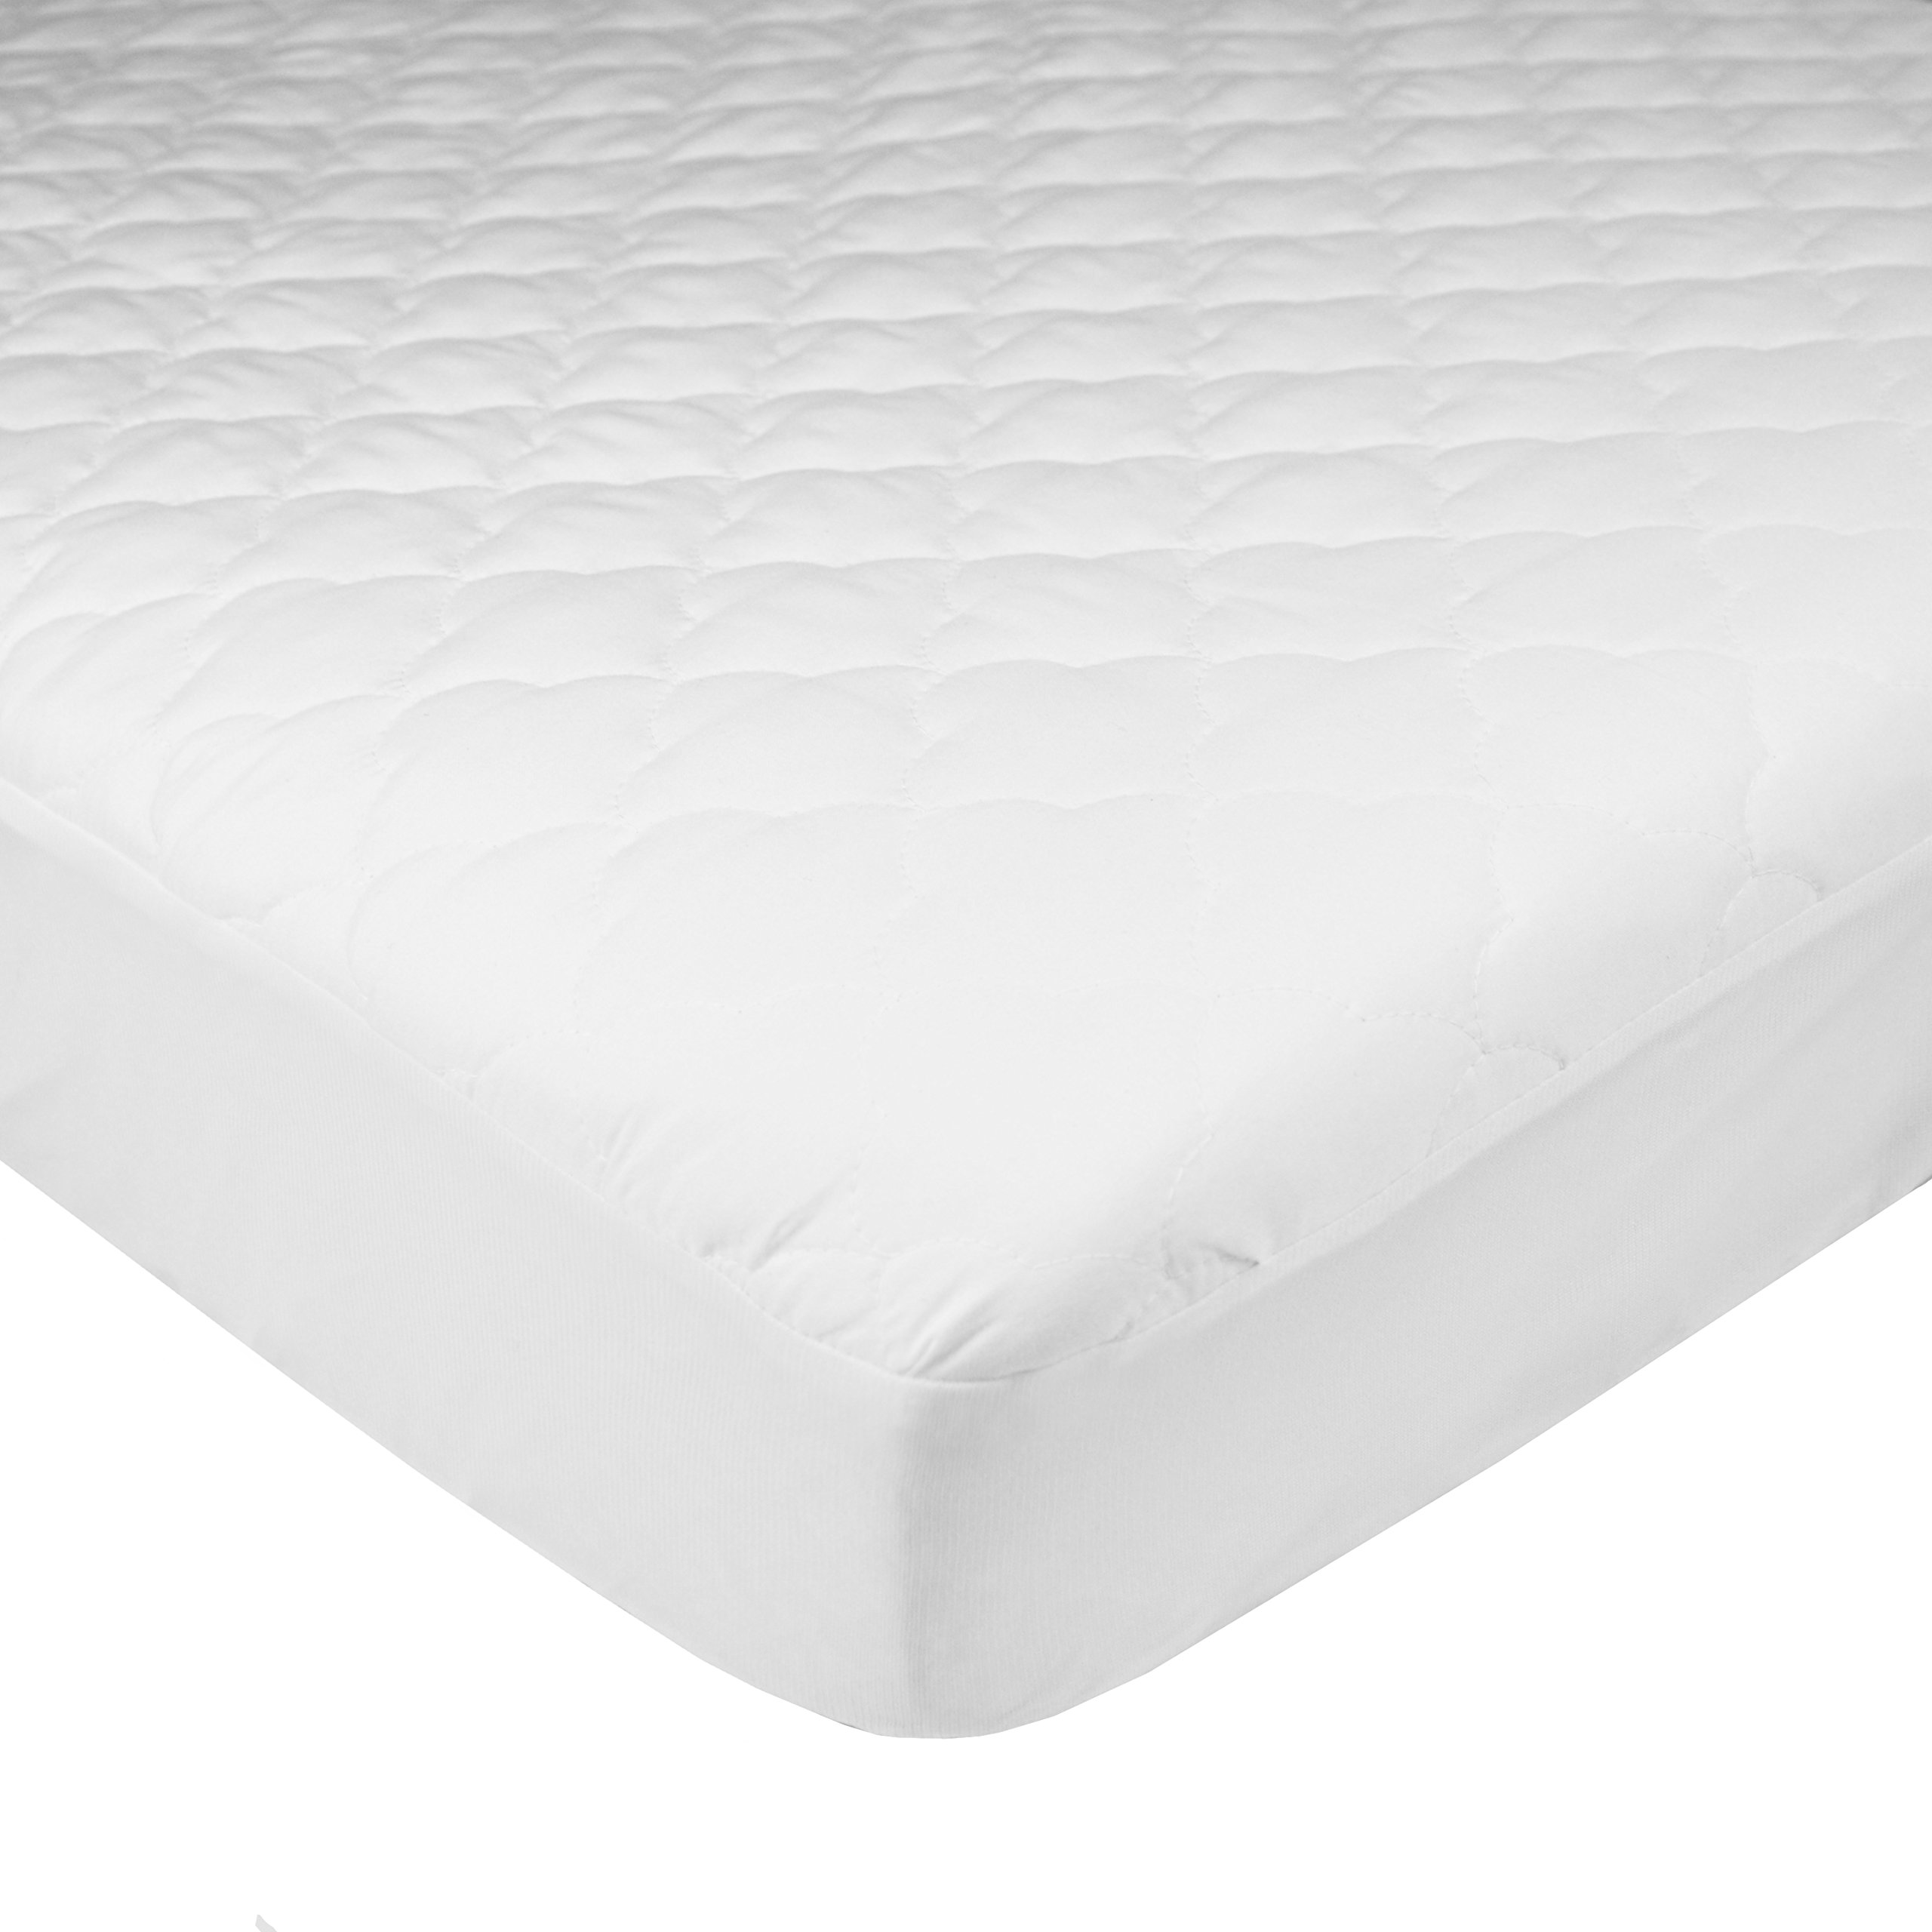 American Baby Company Ultra Soft Waterproof Fitted Quilted Mattress Pad Cover, Pack N Play Playard